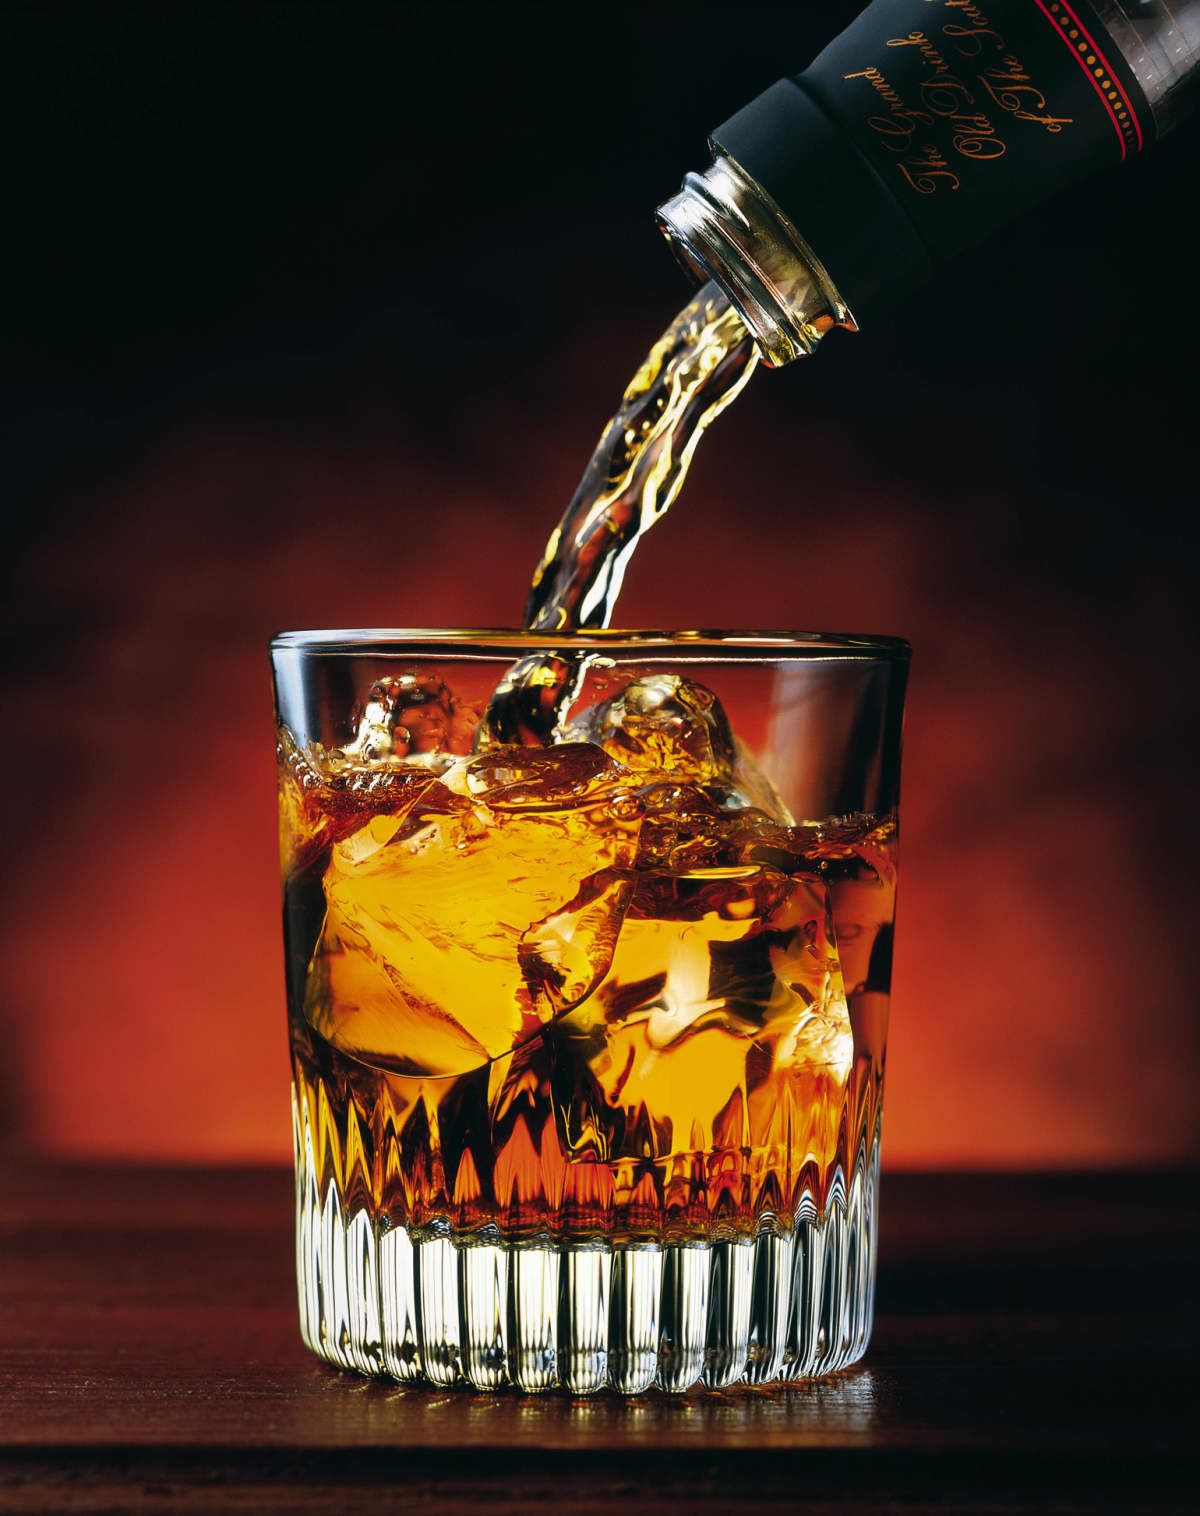 Pouring a glass of whisky with ice from a decanter, in a dark background.